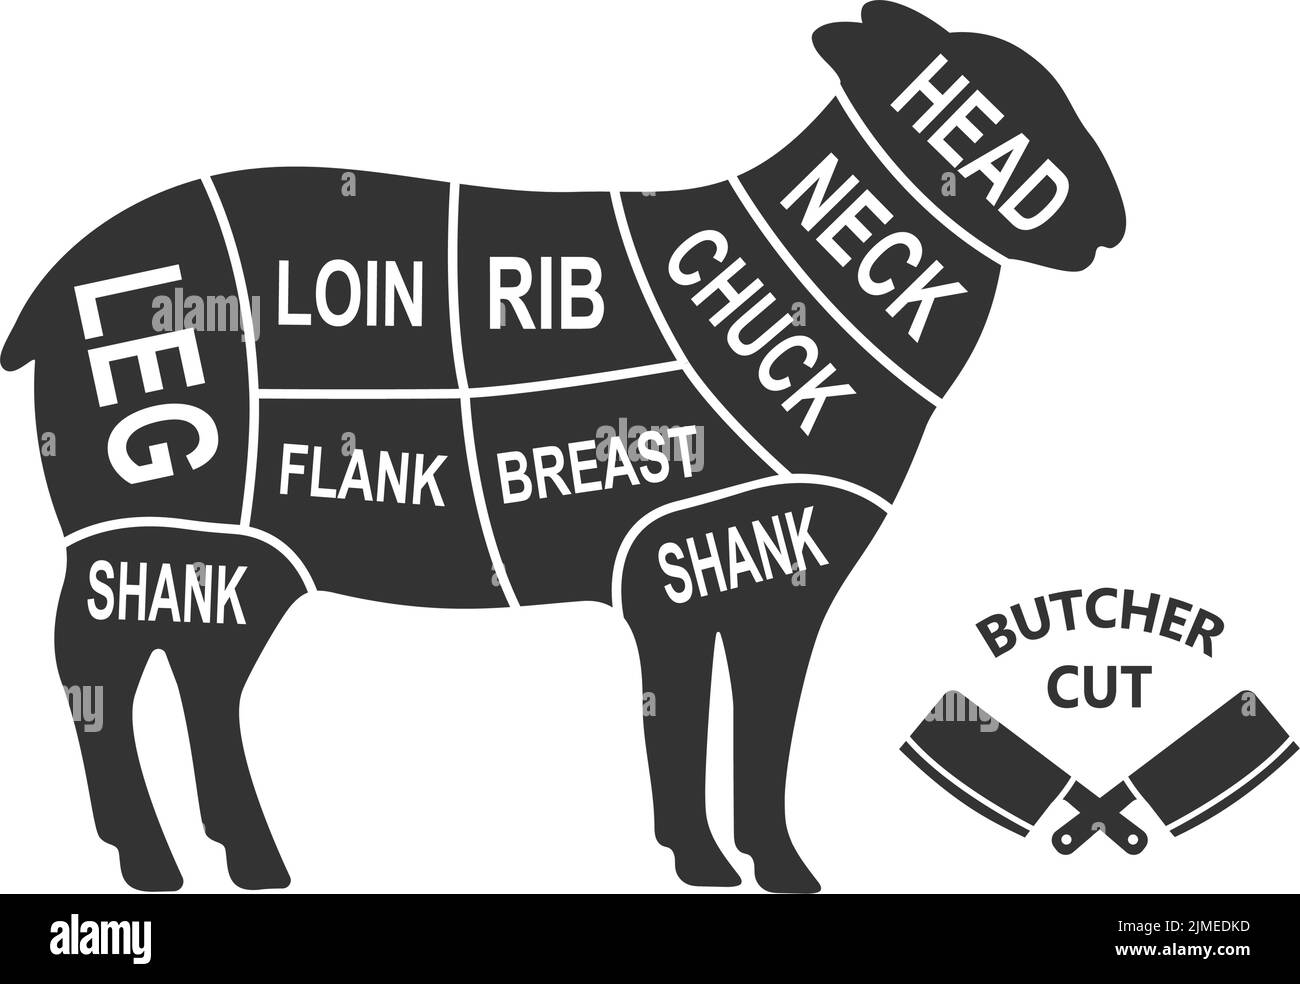 Sheep scheme cuts. Butcher diagram poster. Meat diagram scheme illustration. Cuts of sheep meat. Farm animal silhouette. Stock Vector